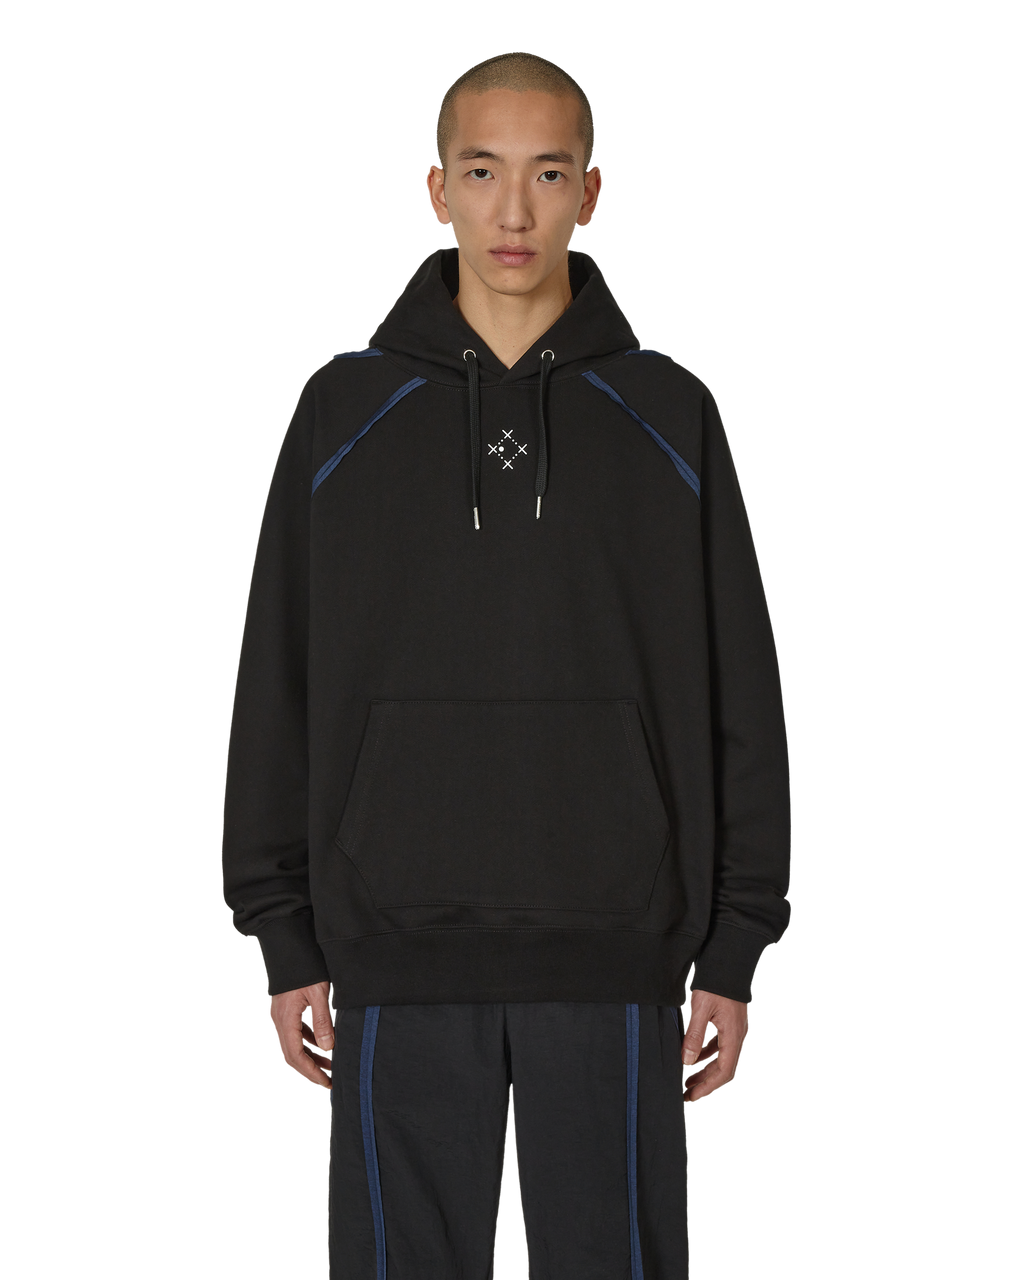 _J.L - A.L_ _J.L-A.L_ x Sound Sports Hoodie J297460-S-Black front